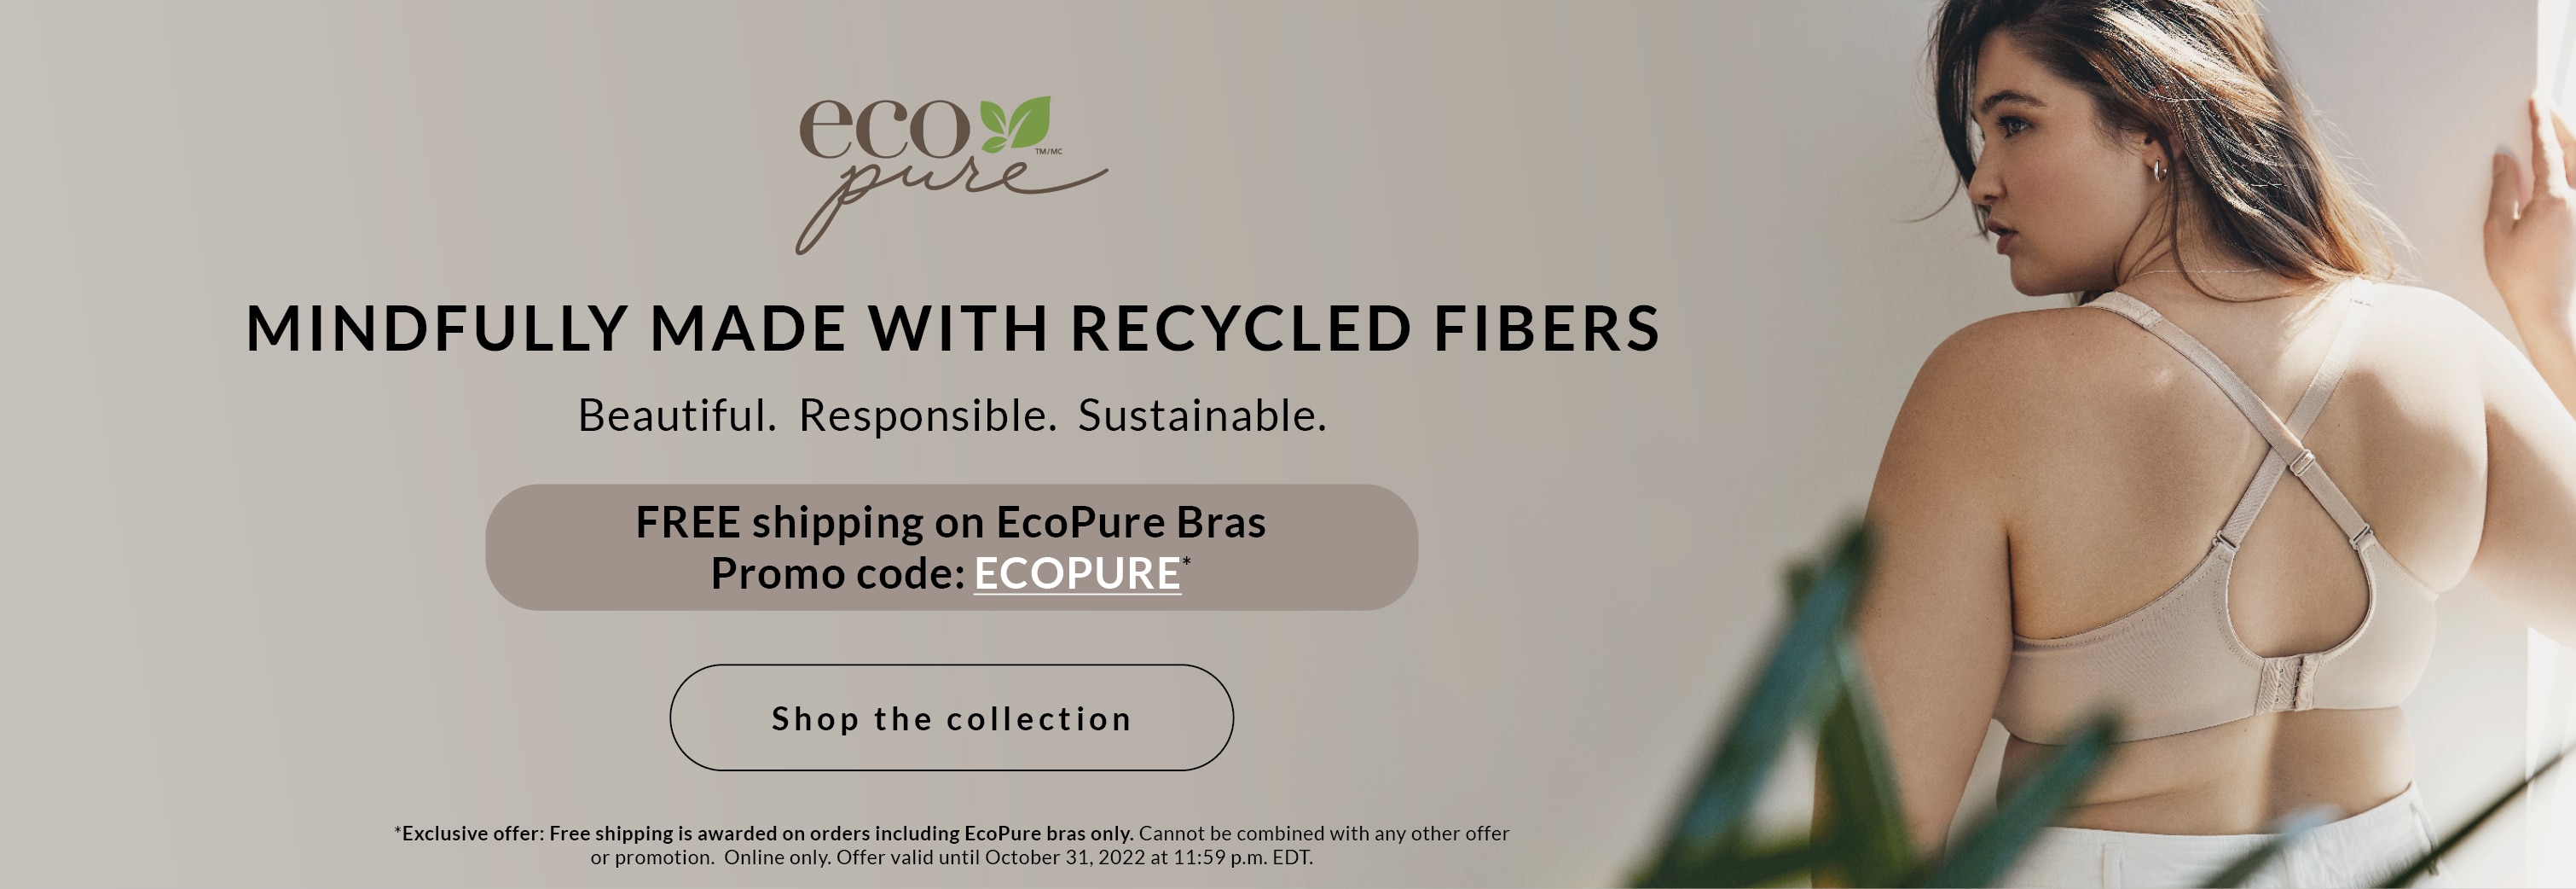 Building a more sustainable future, one bra at a time The collection that combines comfort, style and eco-responsibility. FOR A LIMITED TIME FREE shipping on ECOPURE bras *Exclusive offer: Free shipping is awarded on orders including EcoPure bras only.